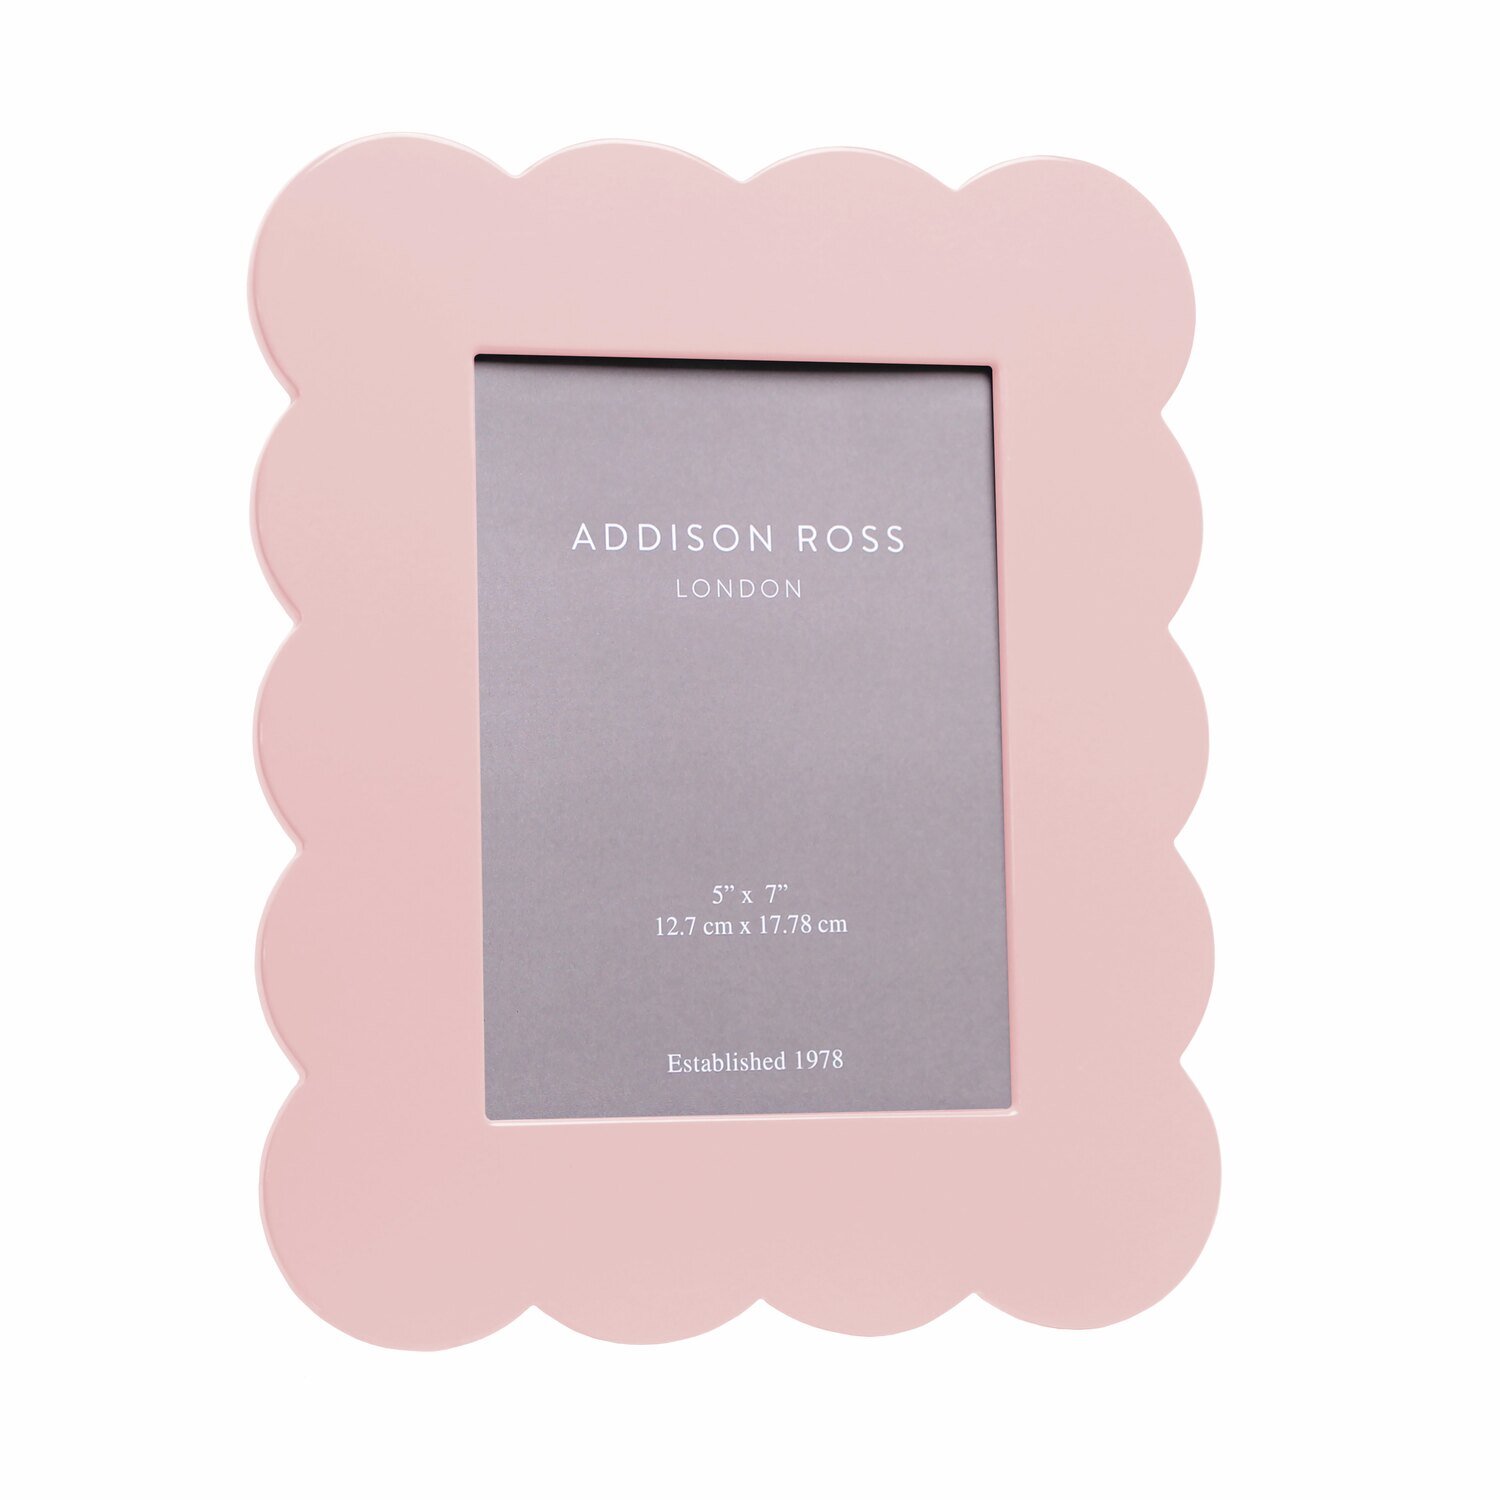 Addison Ross Pink Scalloped Lacquer Photo Frame 5 x 7 Inch Lacquer FR11003